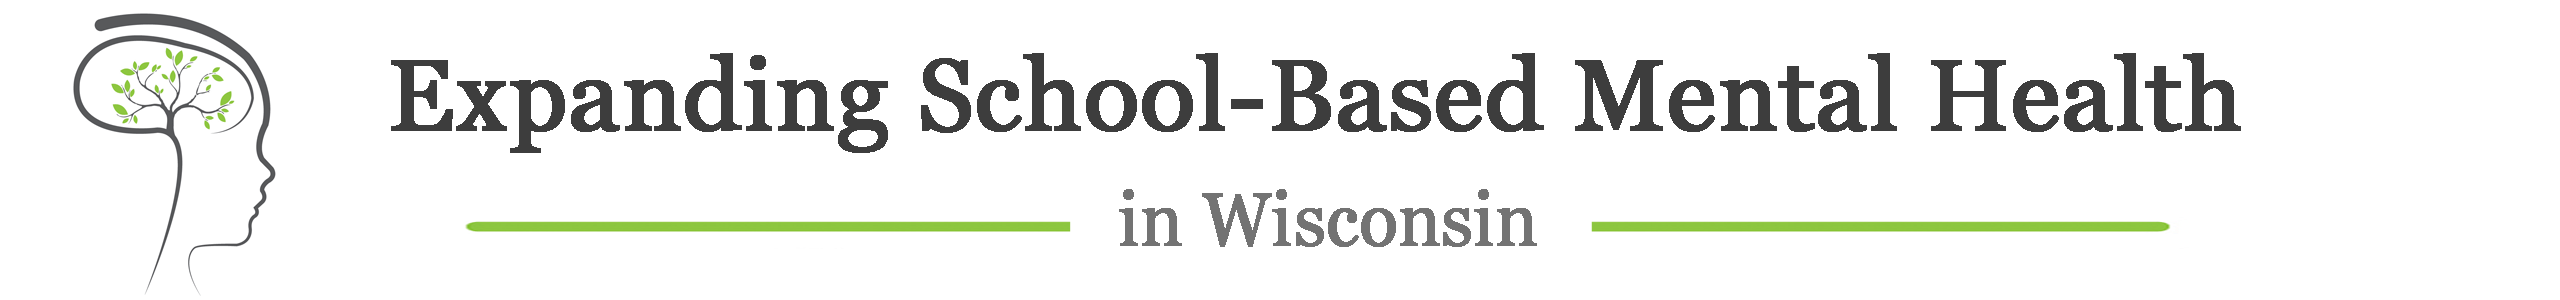 Coalition for Expanding School-Based Mental Health in Wisconsin